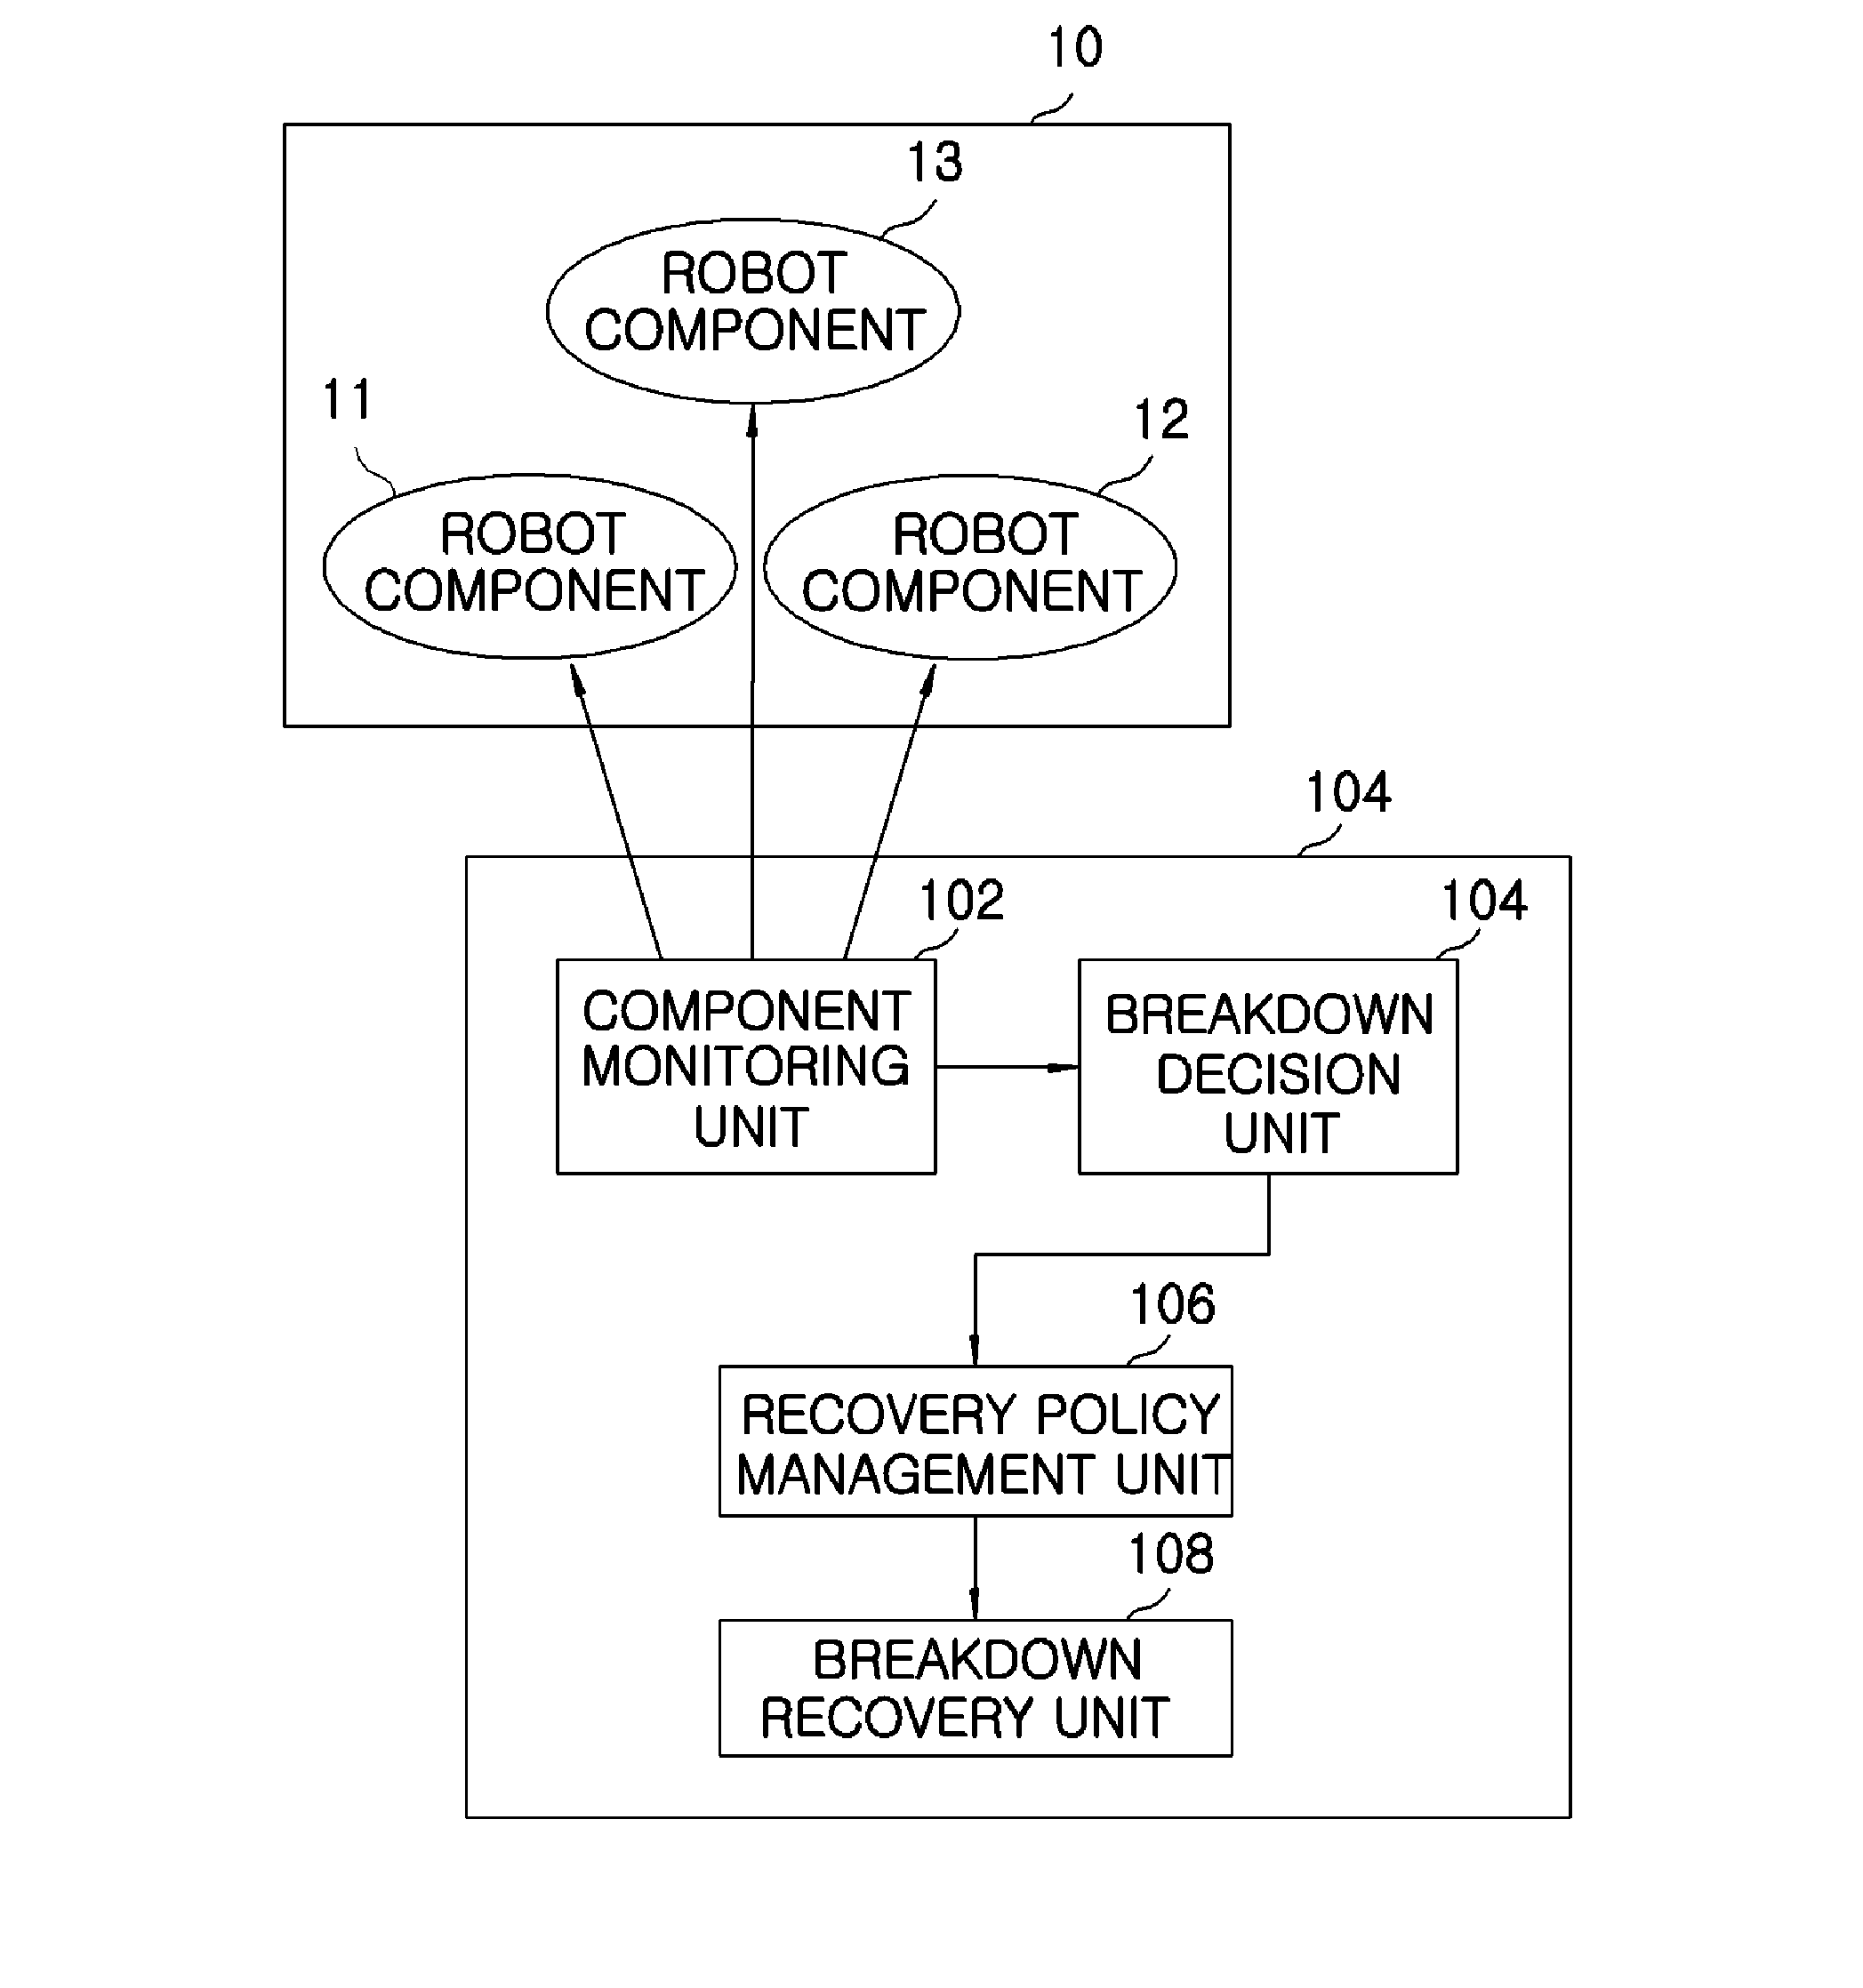 Apparatus and method for managing robot components